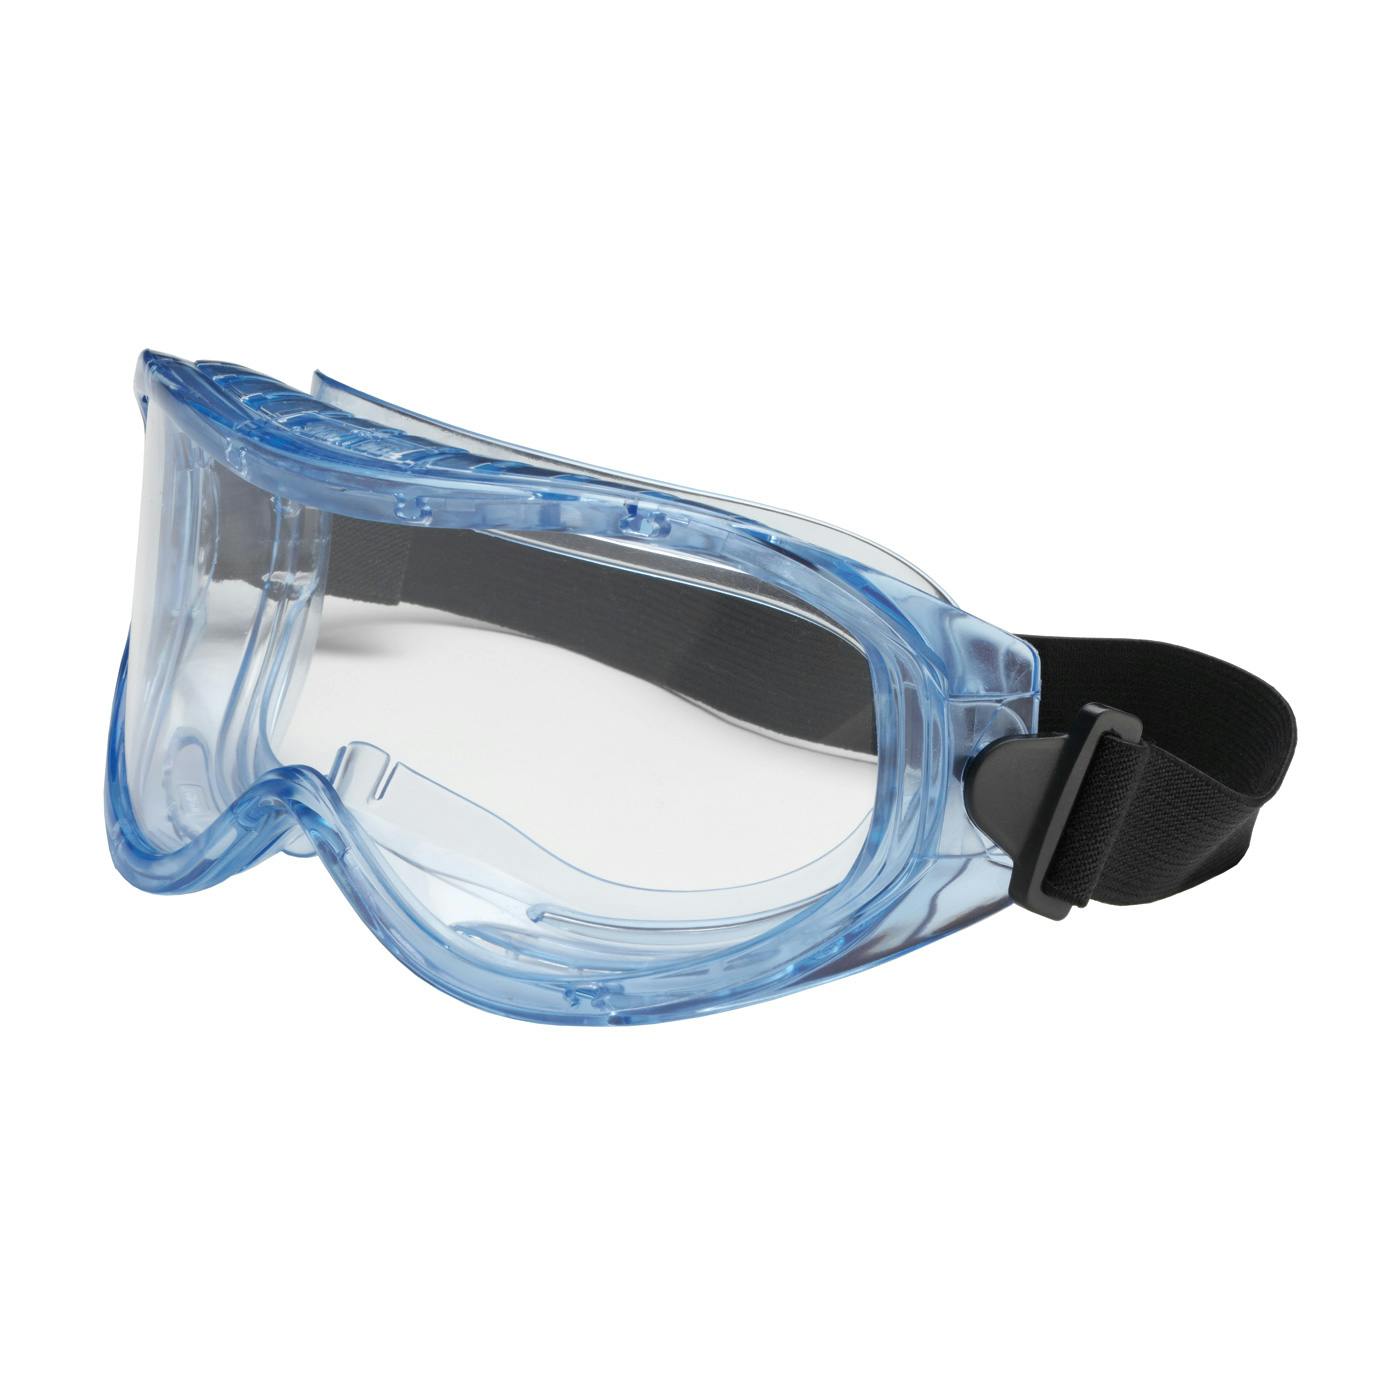 Indirect Vent Goggle with Light Blue Body, Clear Lens and Anti-Scratch Coating, Light Blue (251-5300-000) - OS_0